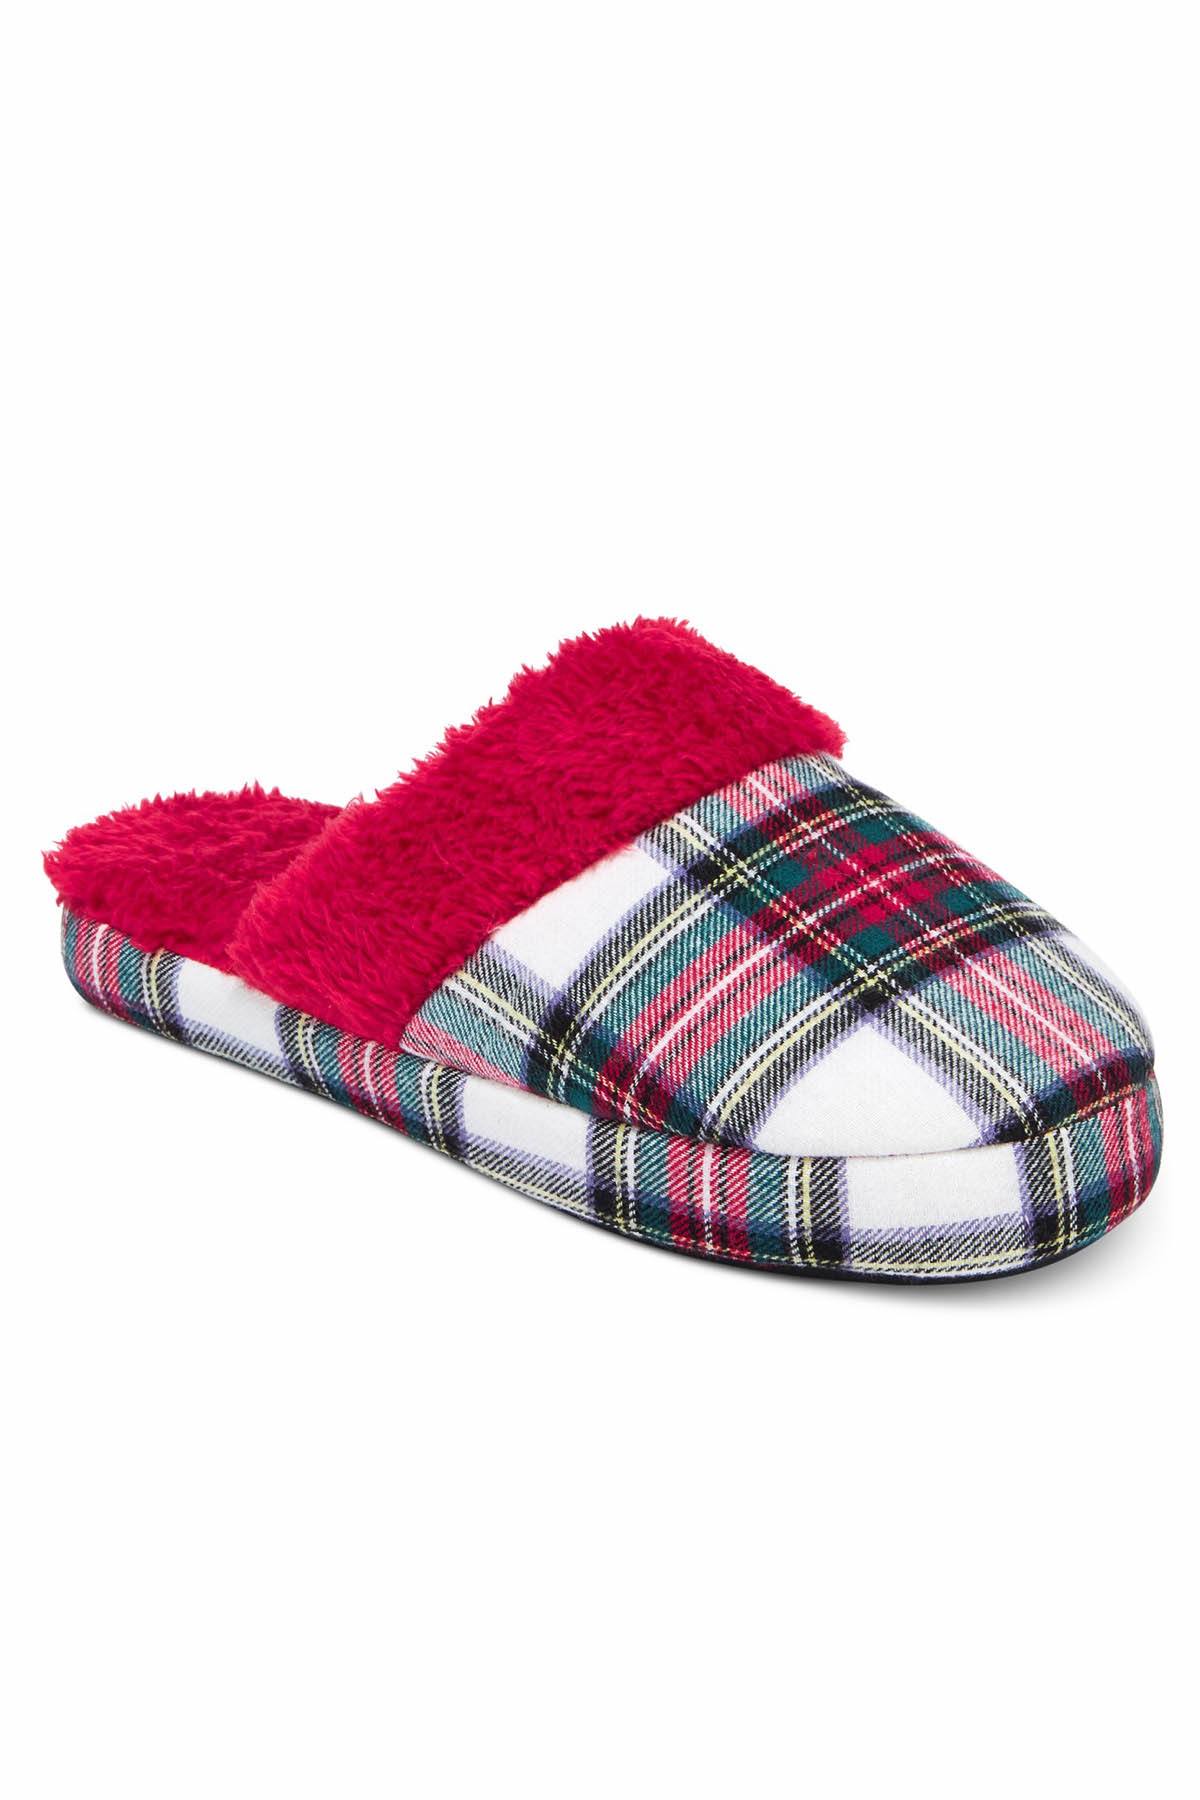 Charter Club Intimates Stewart-Plaid Printed Flannel Slippers